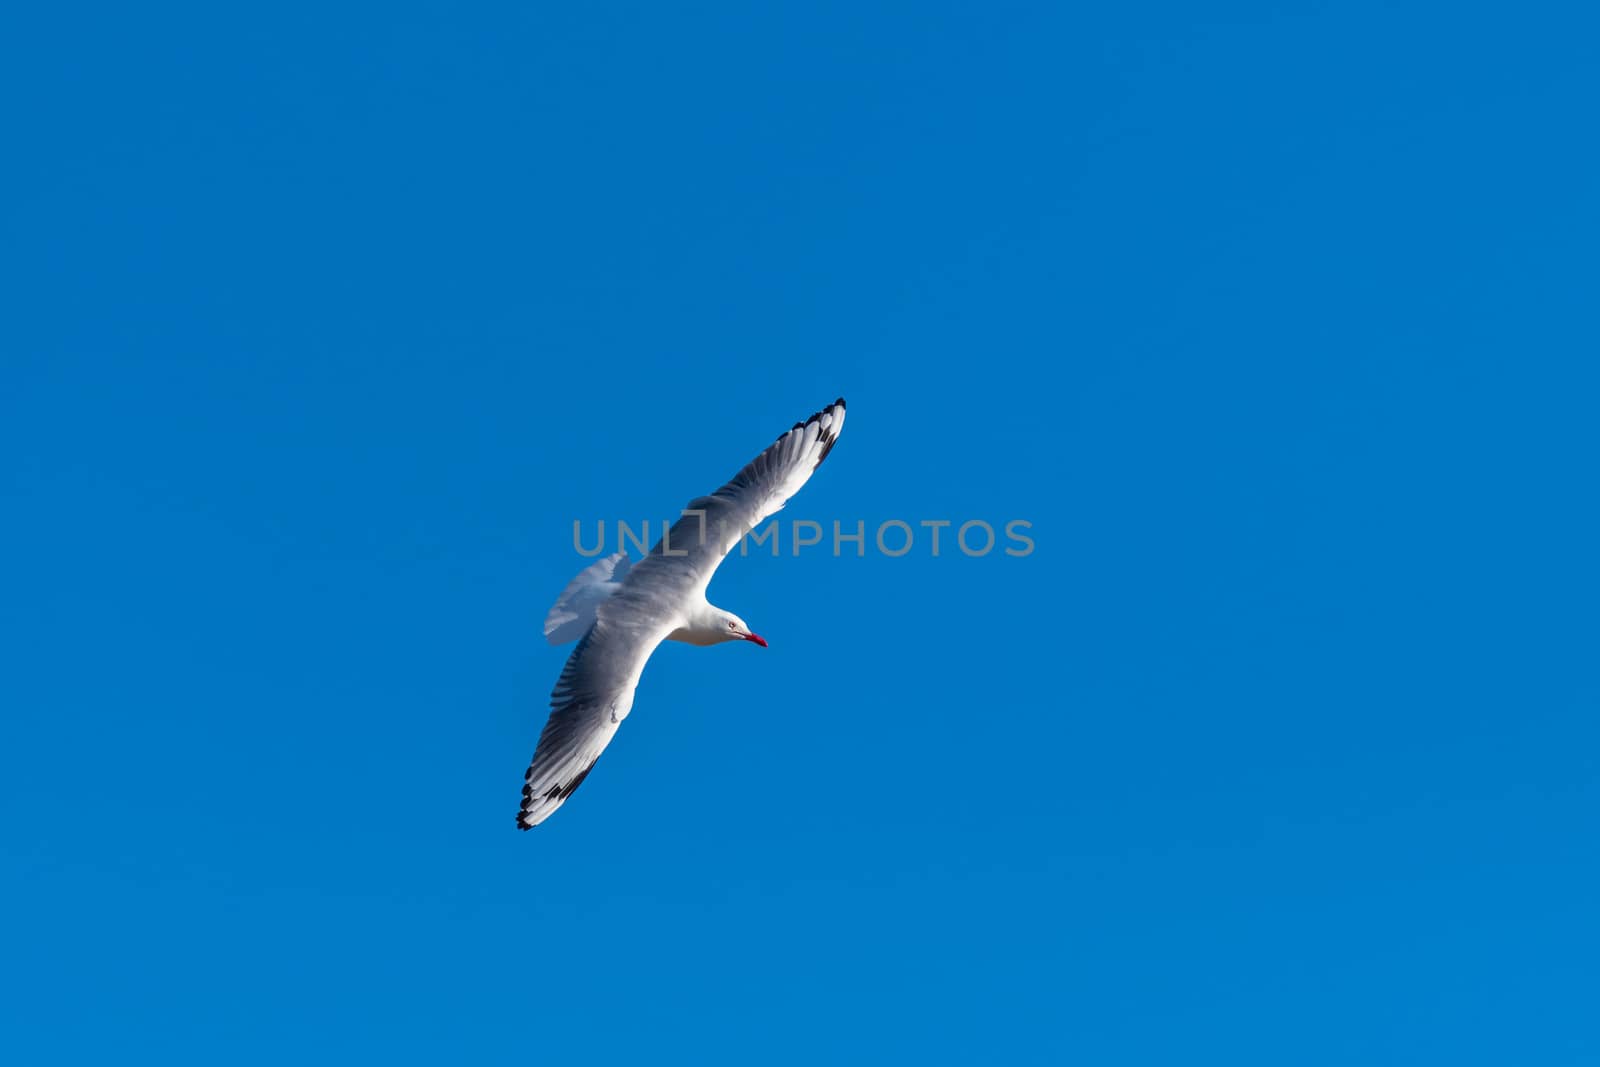 Single seagull flying on a blue sky background by mauricallari